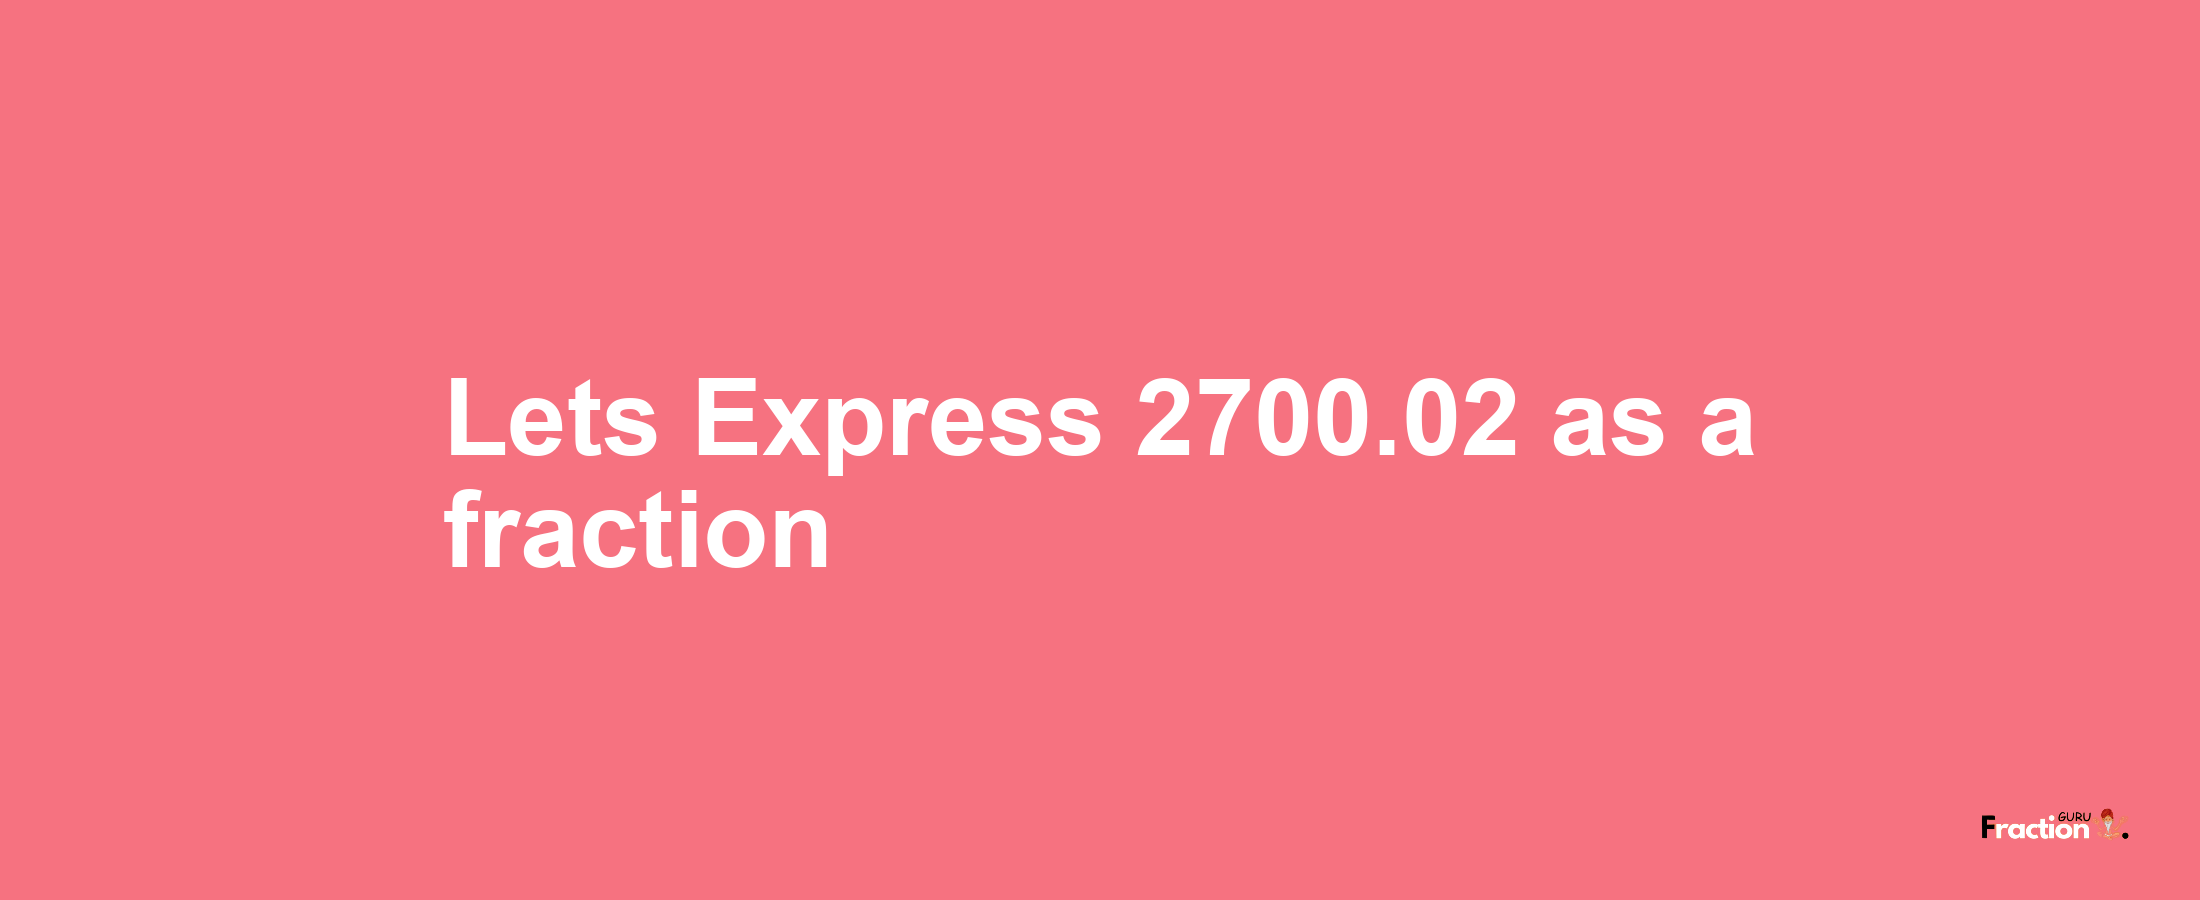 Lets Express 2700.02 as afraction